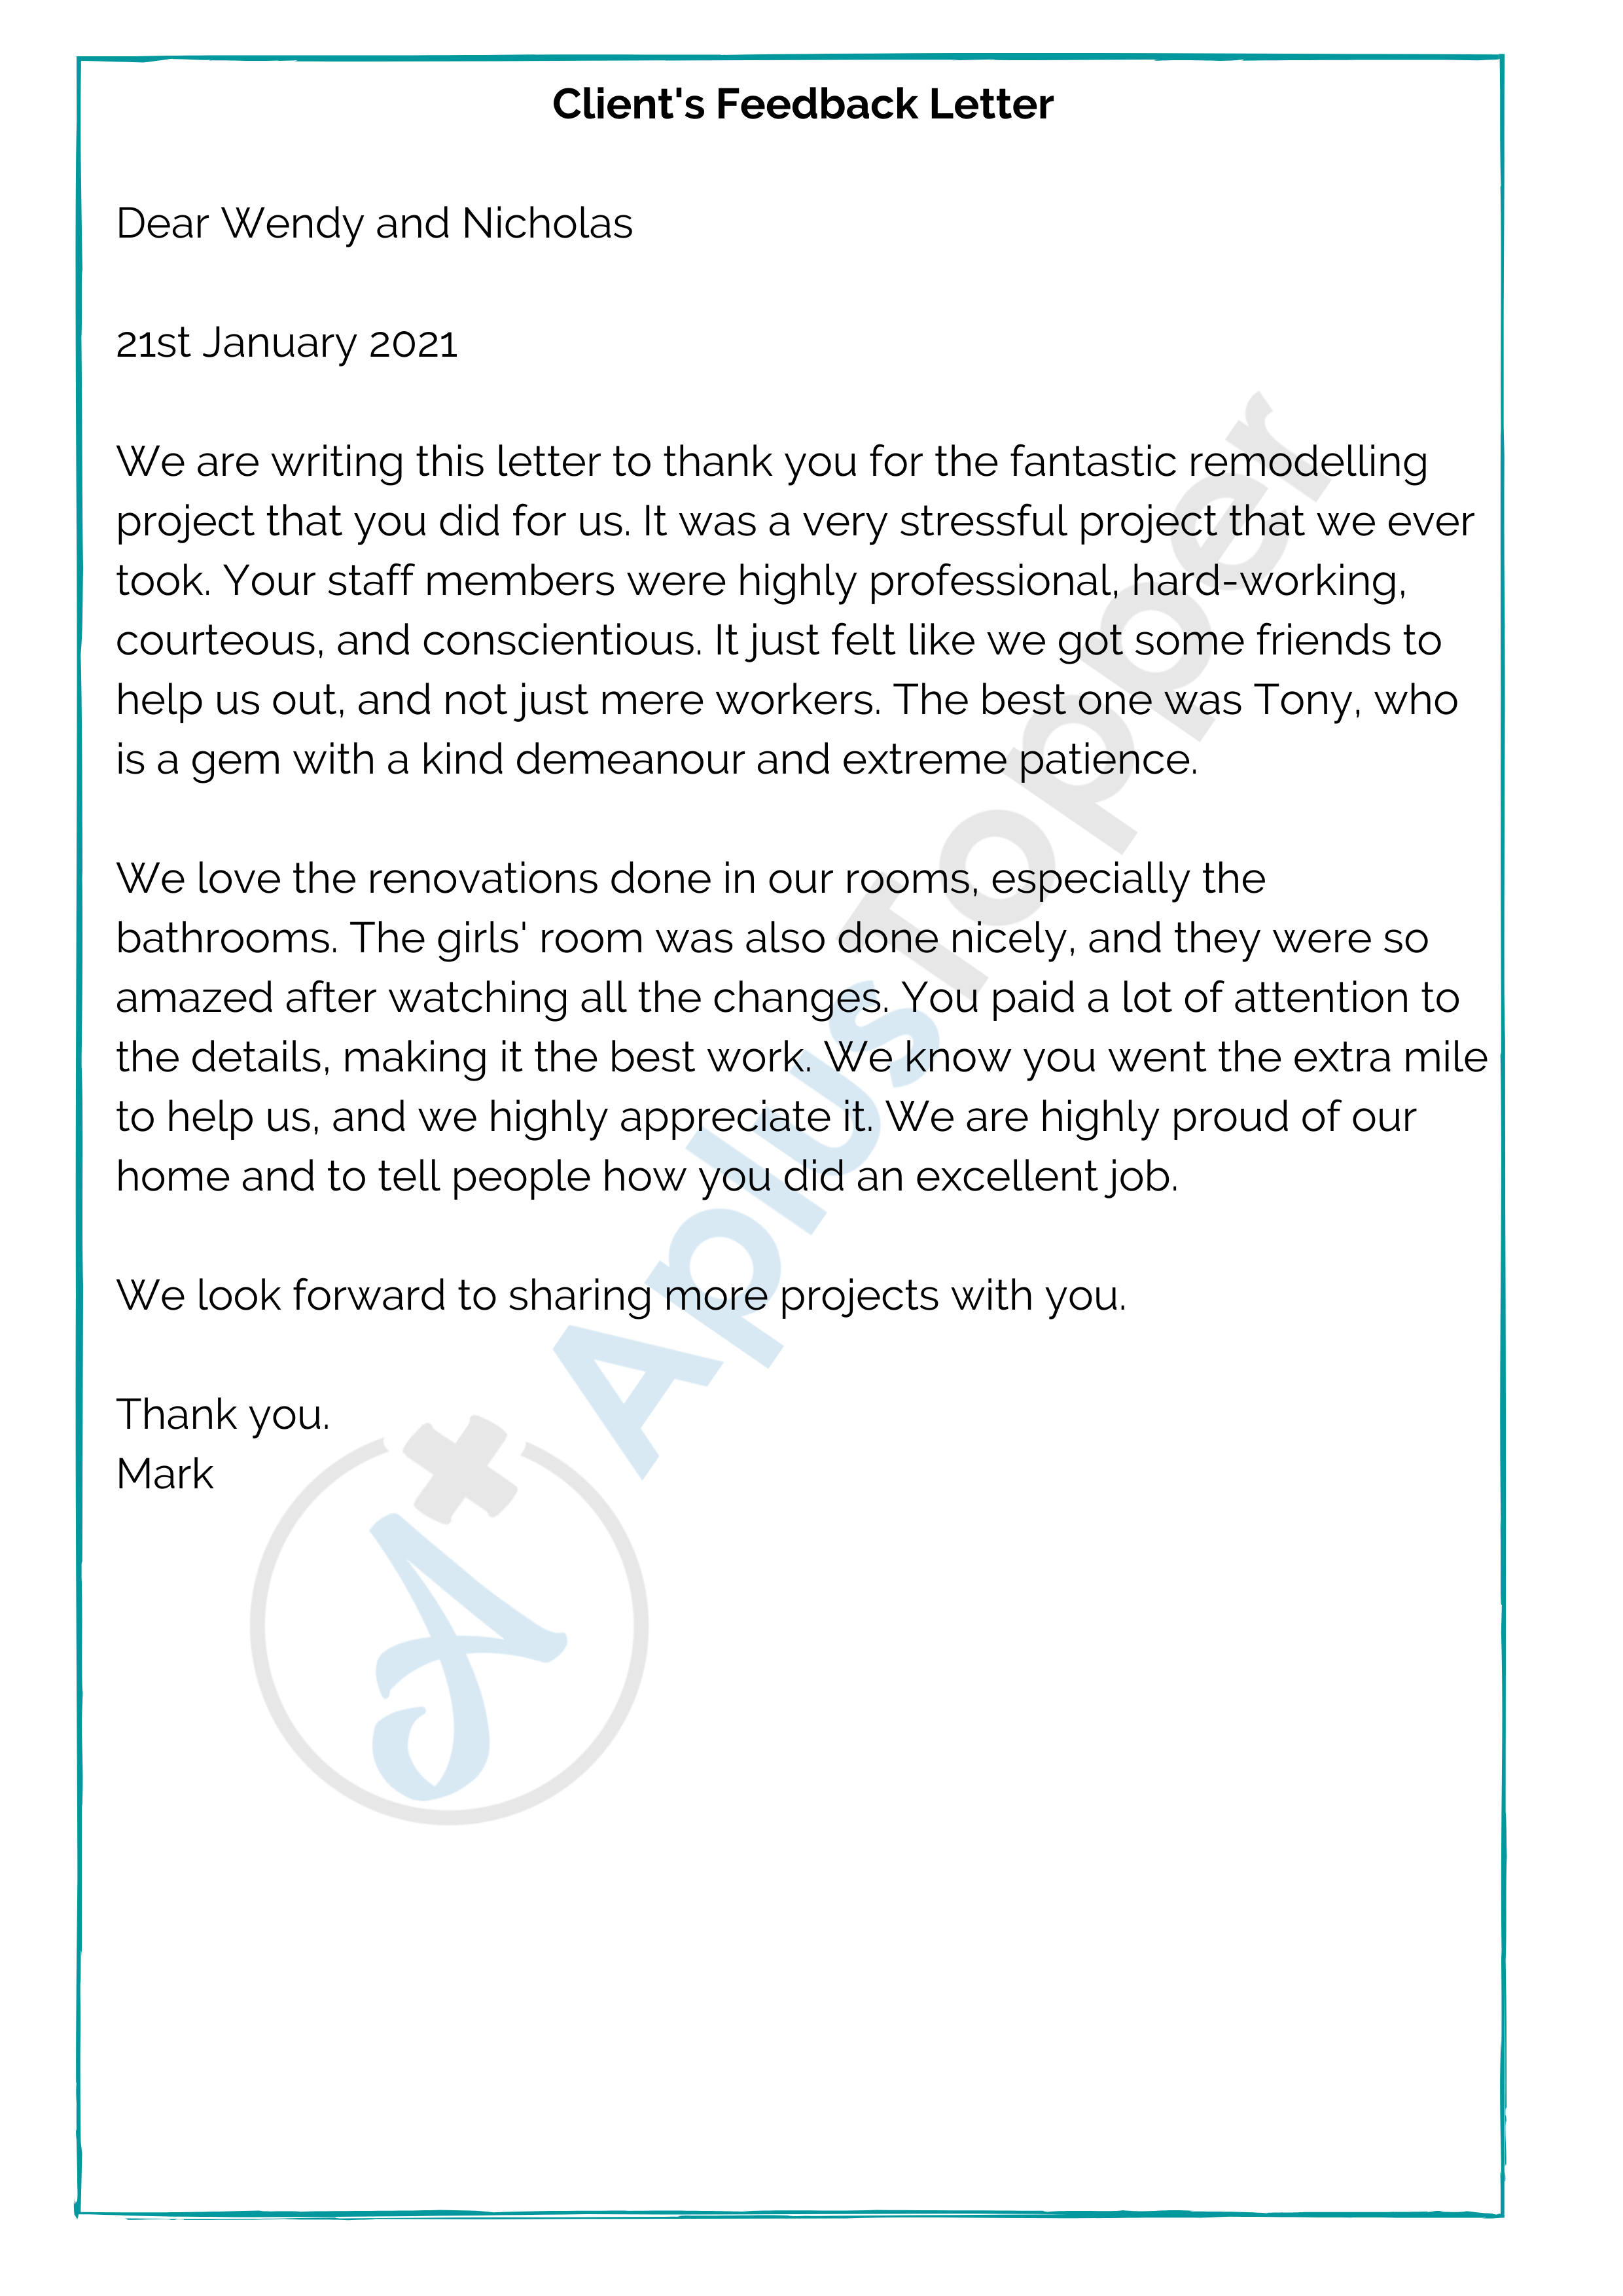 20 Sample Feedback Letters  Format, Examples and How To Write